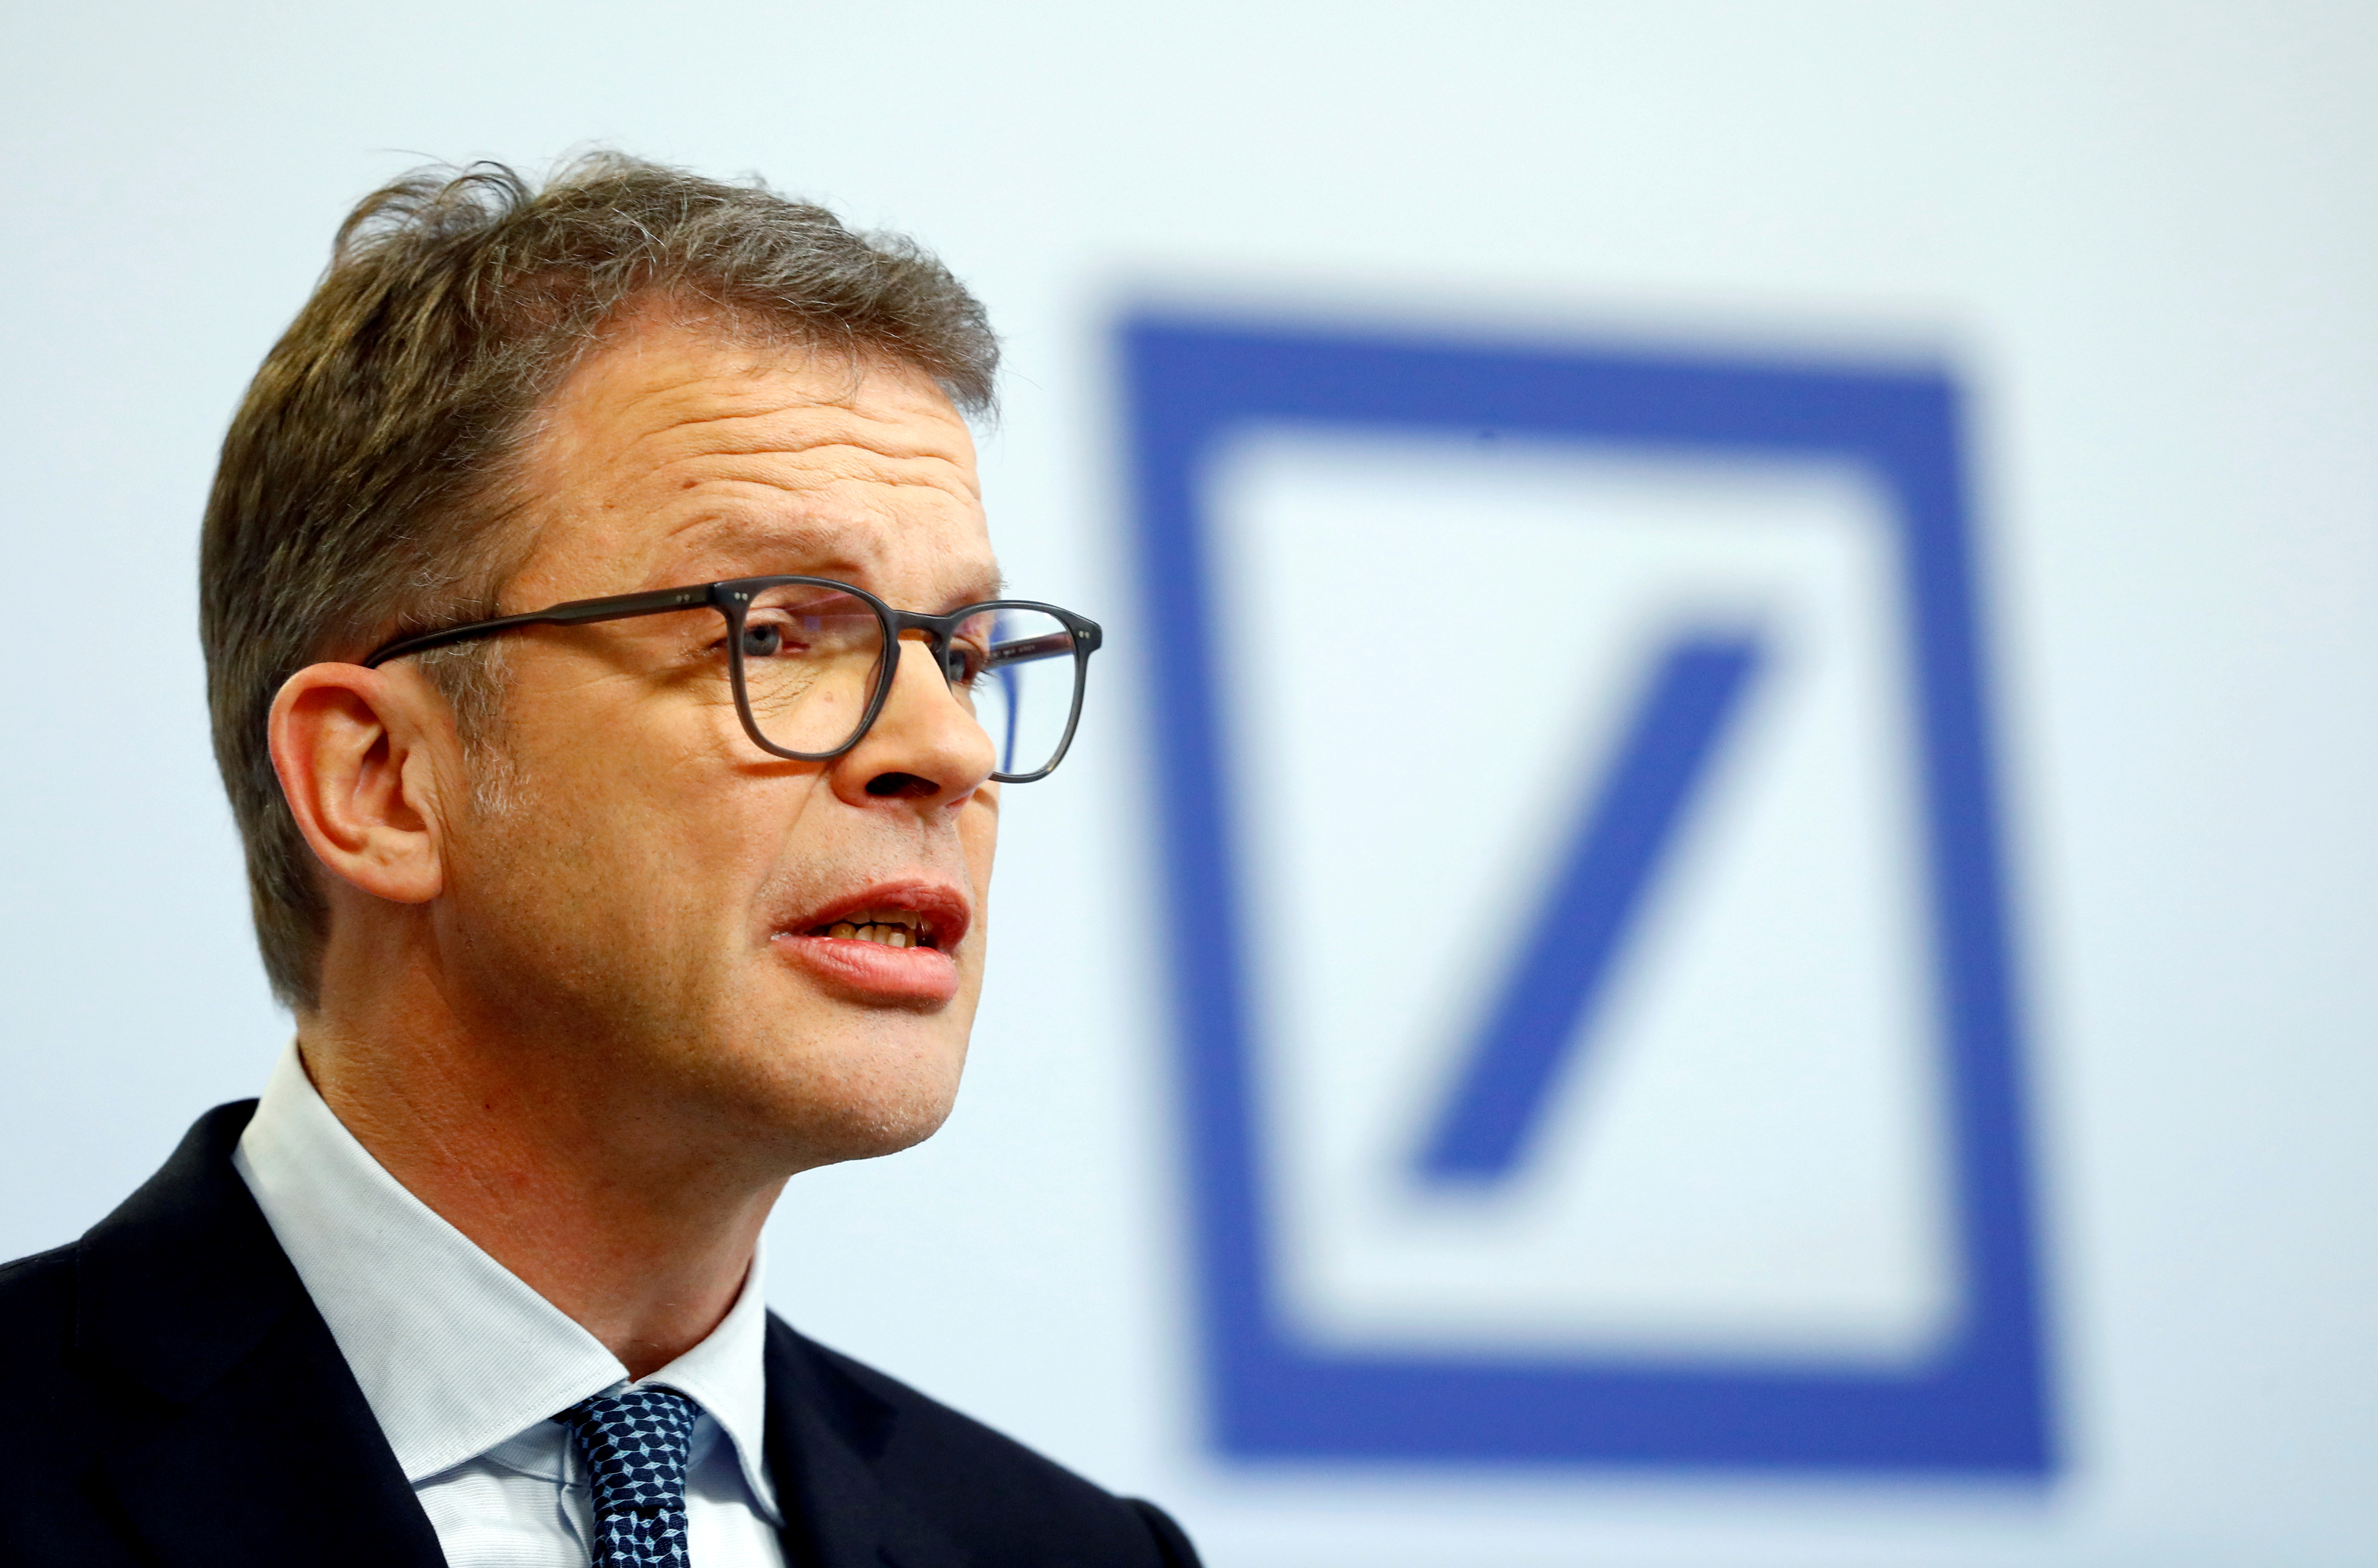 Christian Sewing, CEO of Deutsche Bank AG in Frankfurt, Germany January 30, 2020. REUTERS/Ralph Orlowski/File Photo